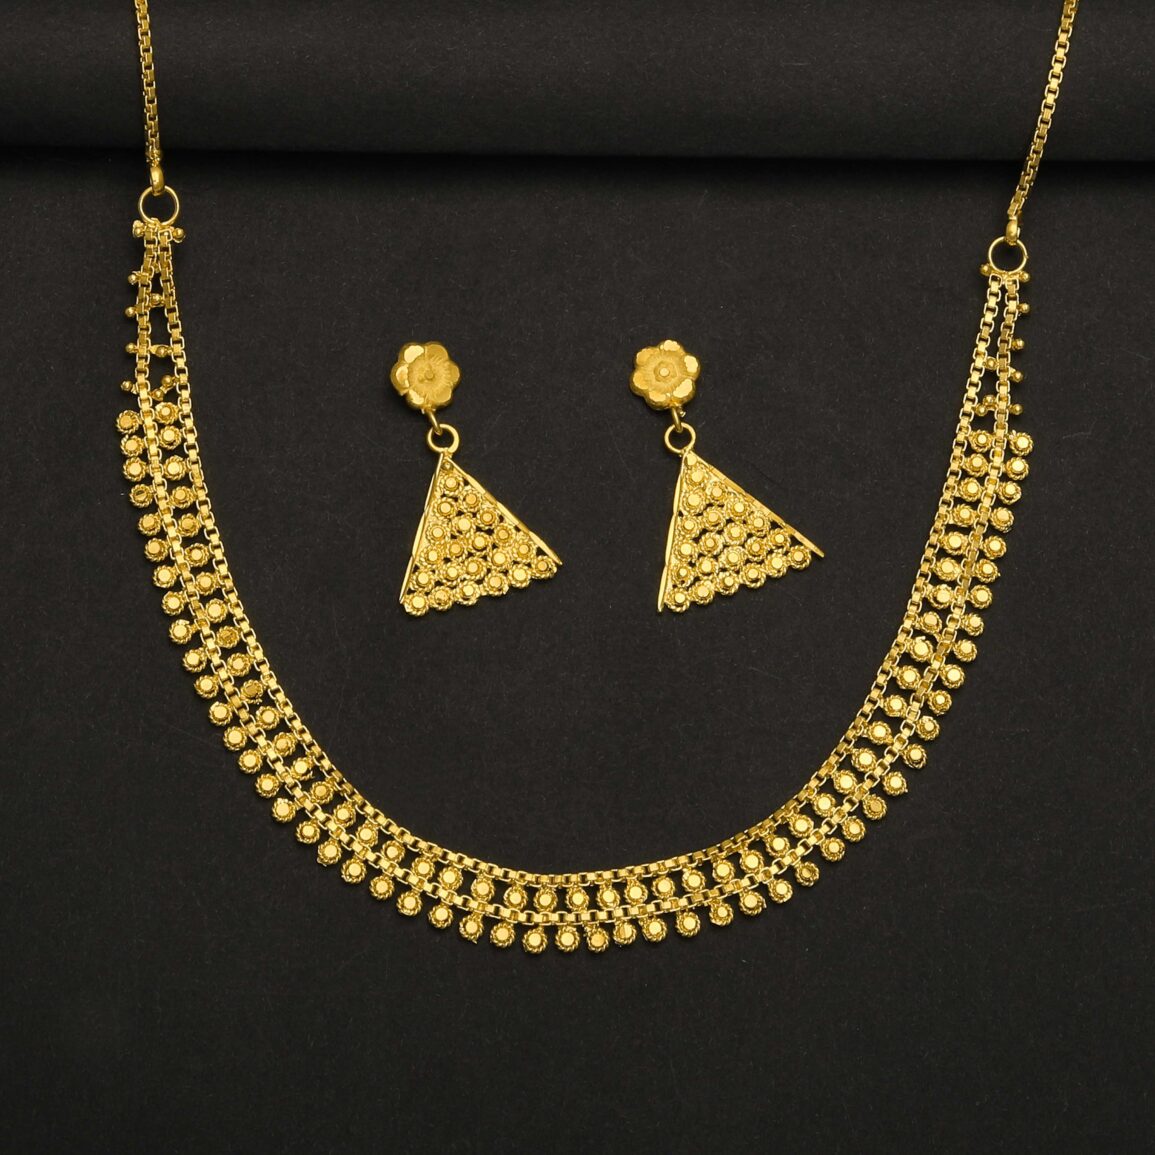 Super quality gold plated necklace set with ear rings